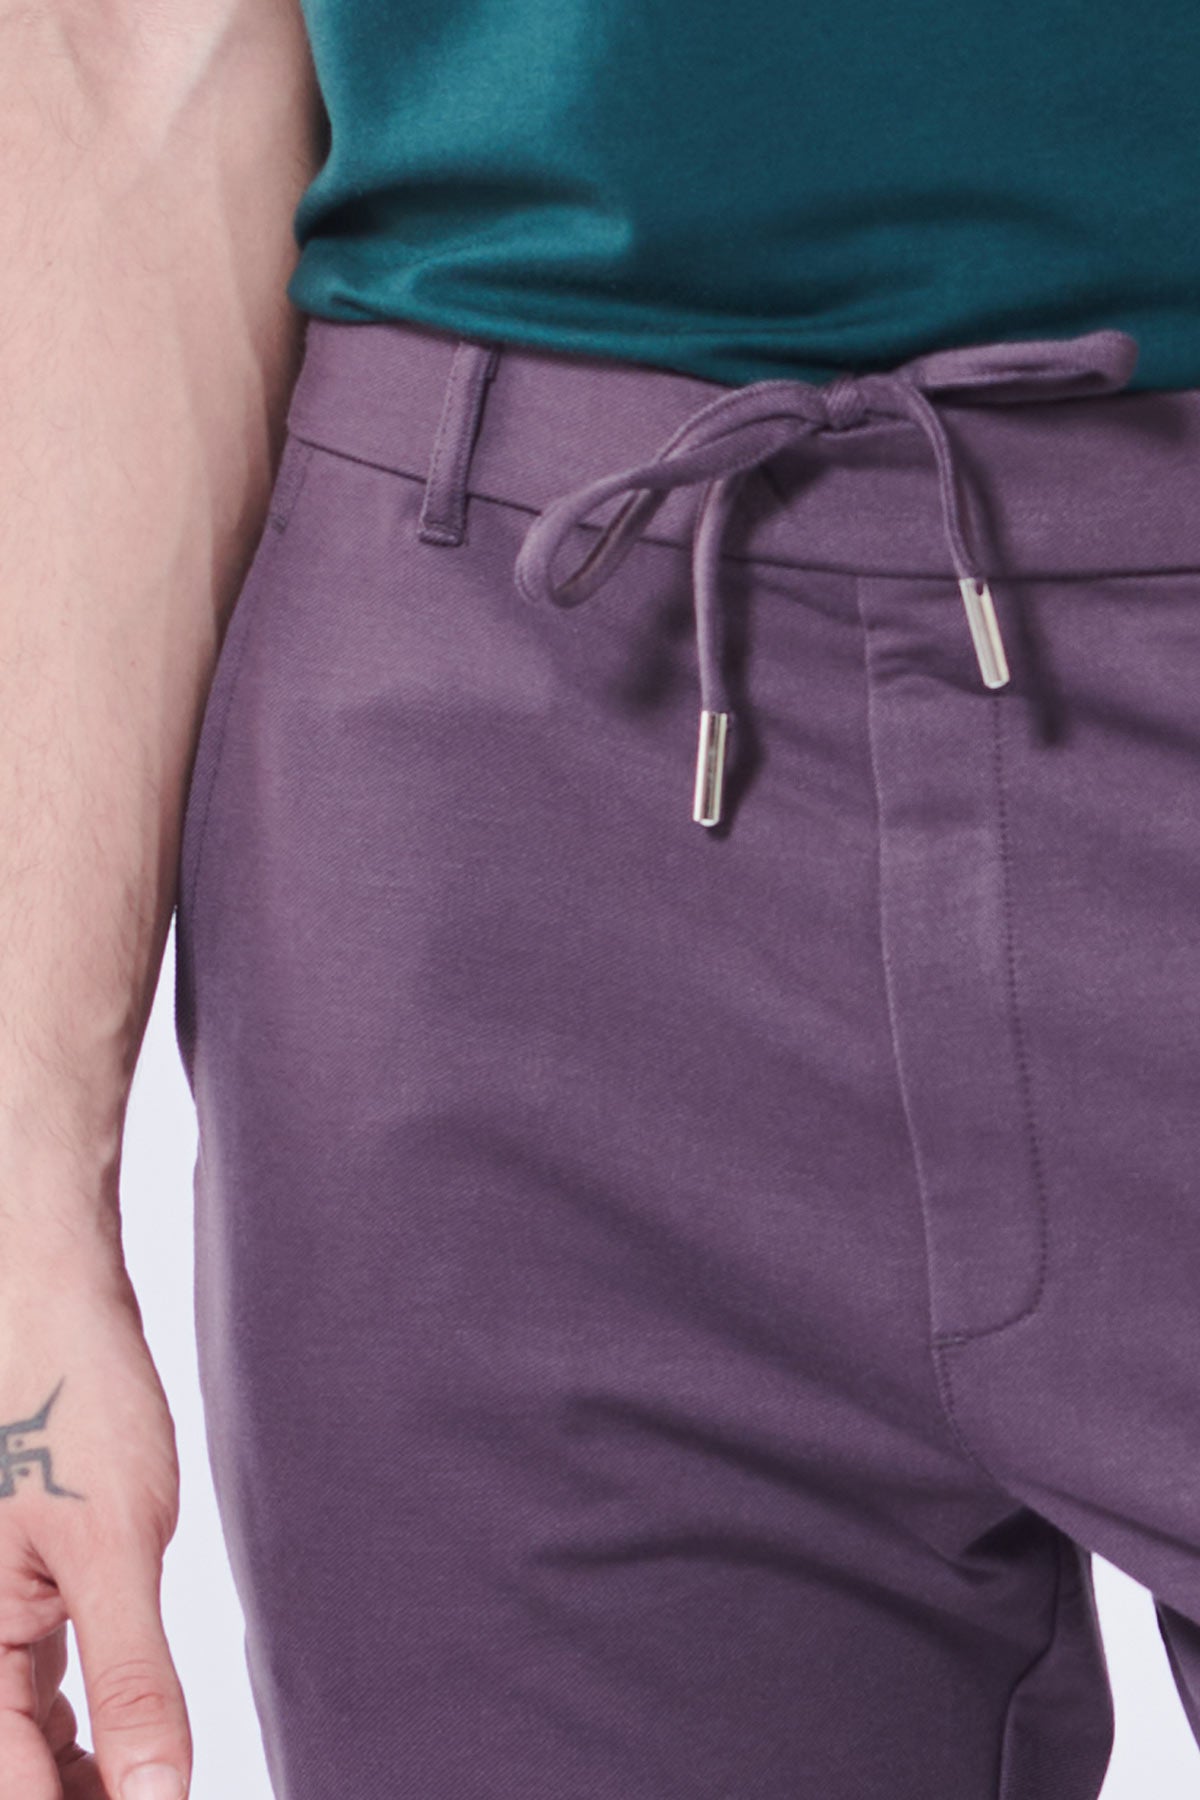 Easy Midnight Violet Pant